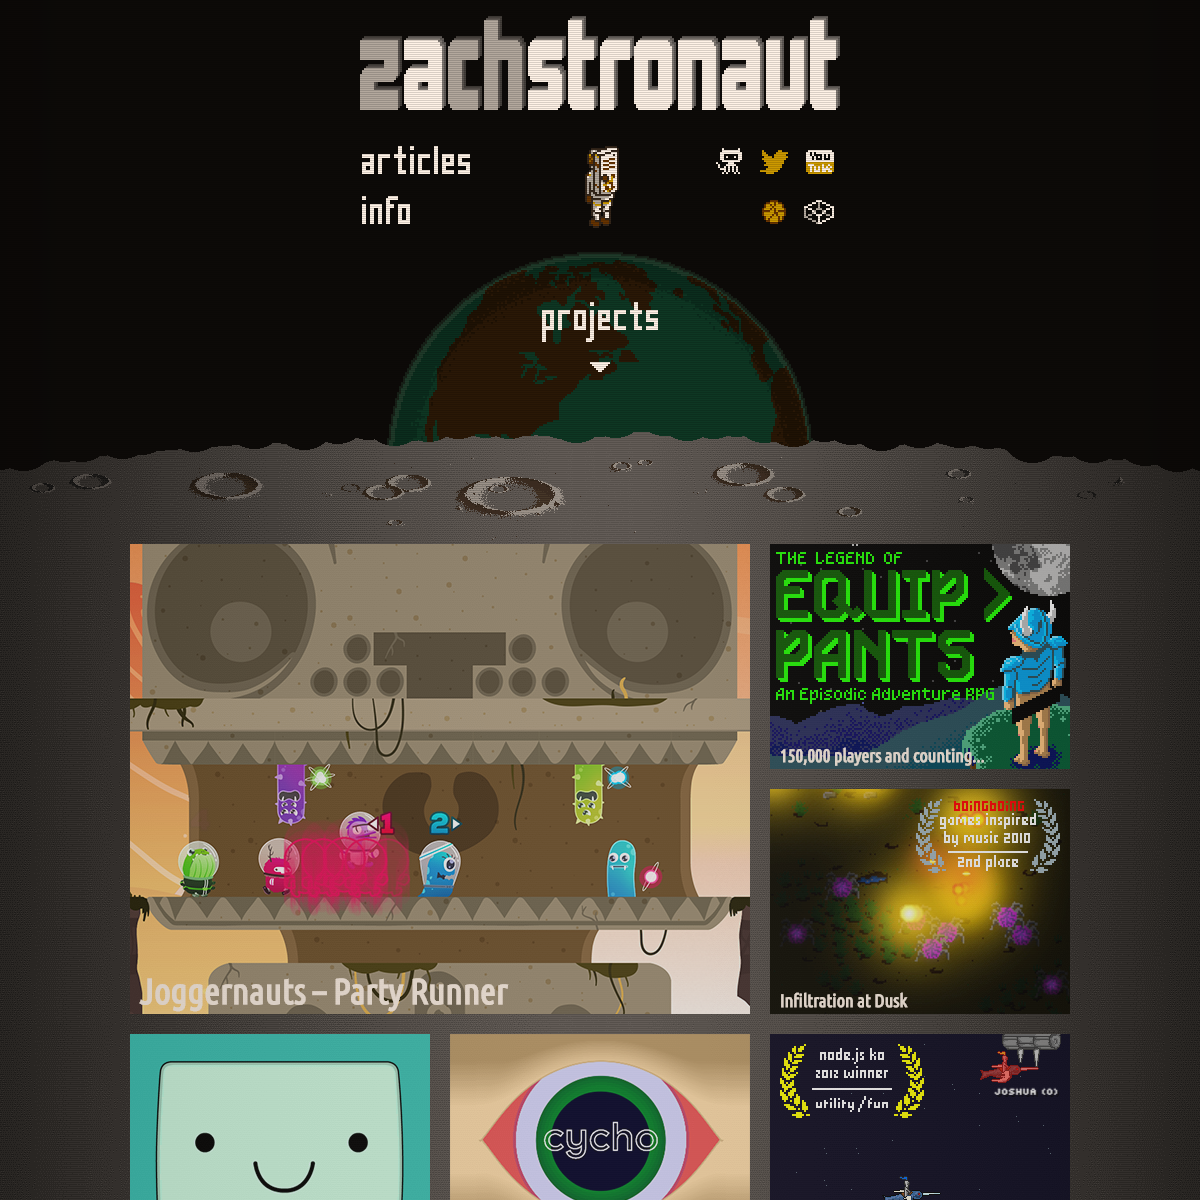 A complete backup of zachstronaut.com